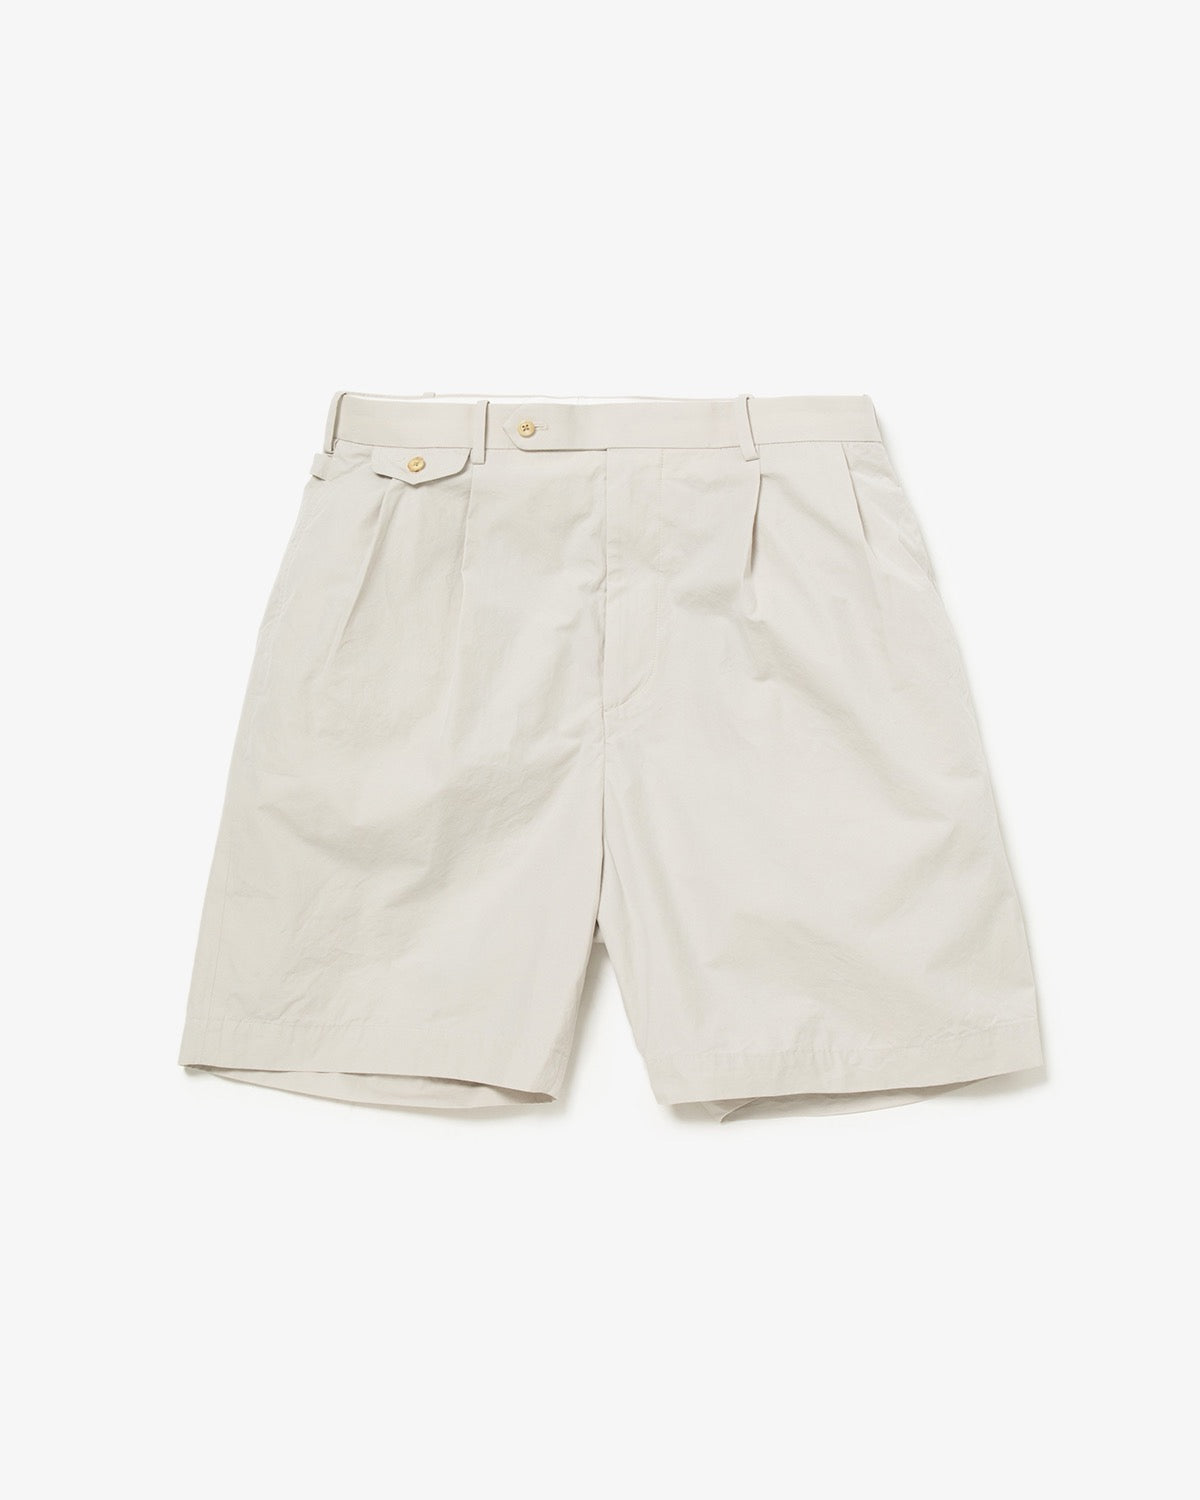 HIGH DENSITY WEATHER CLOTH SHORTS